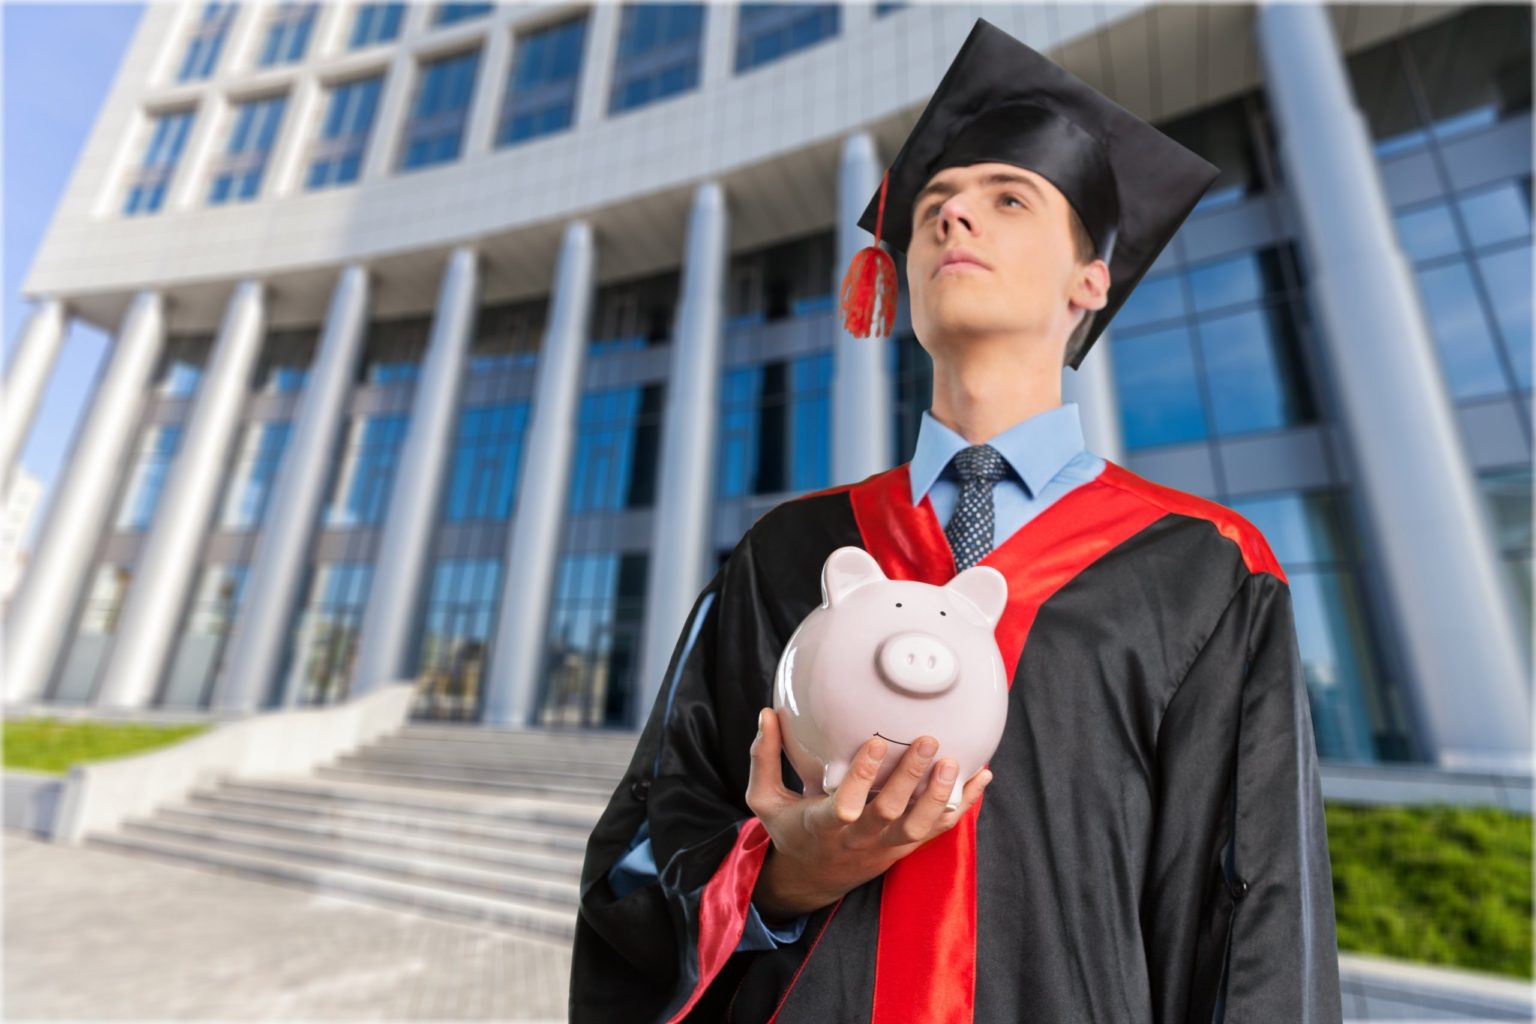 Does a Student Loan Affect Your Credit Score?